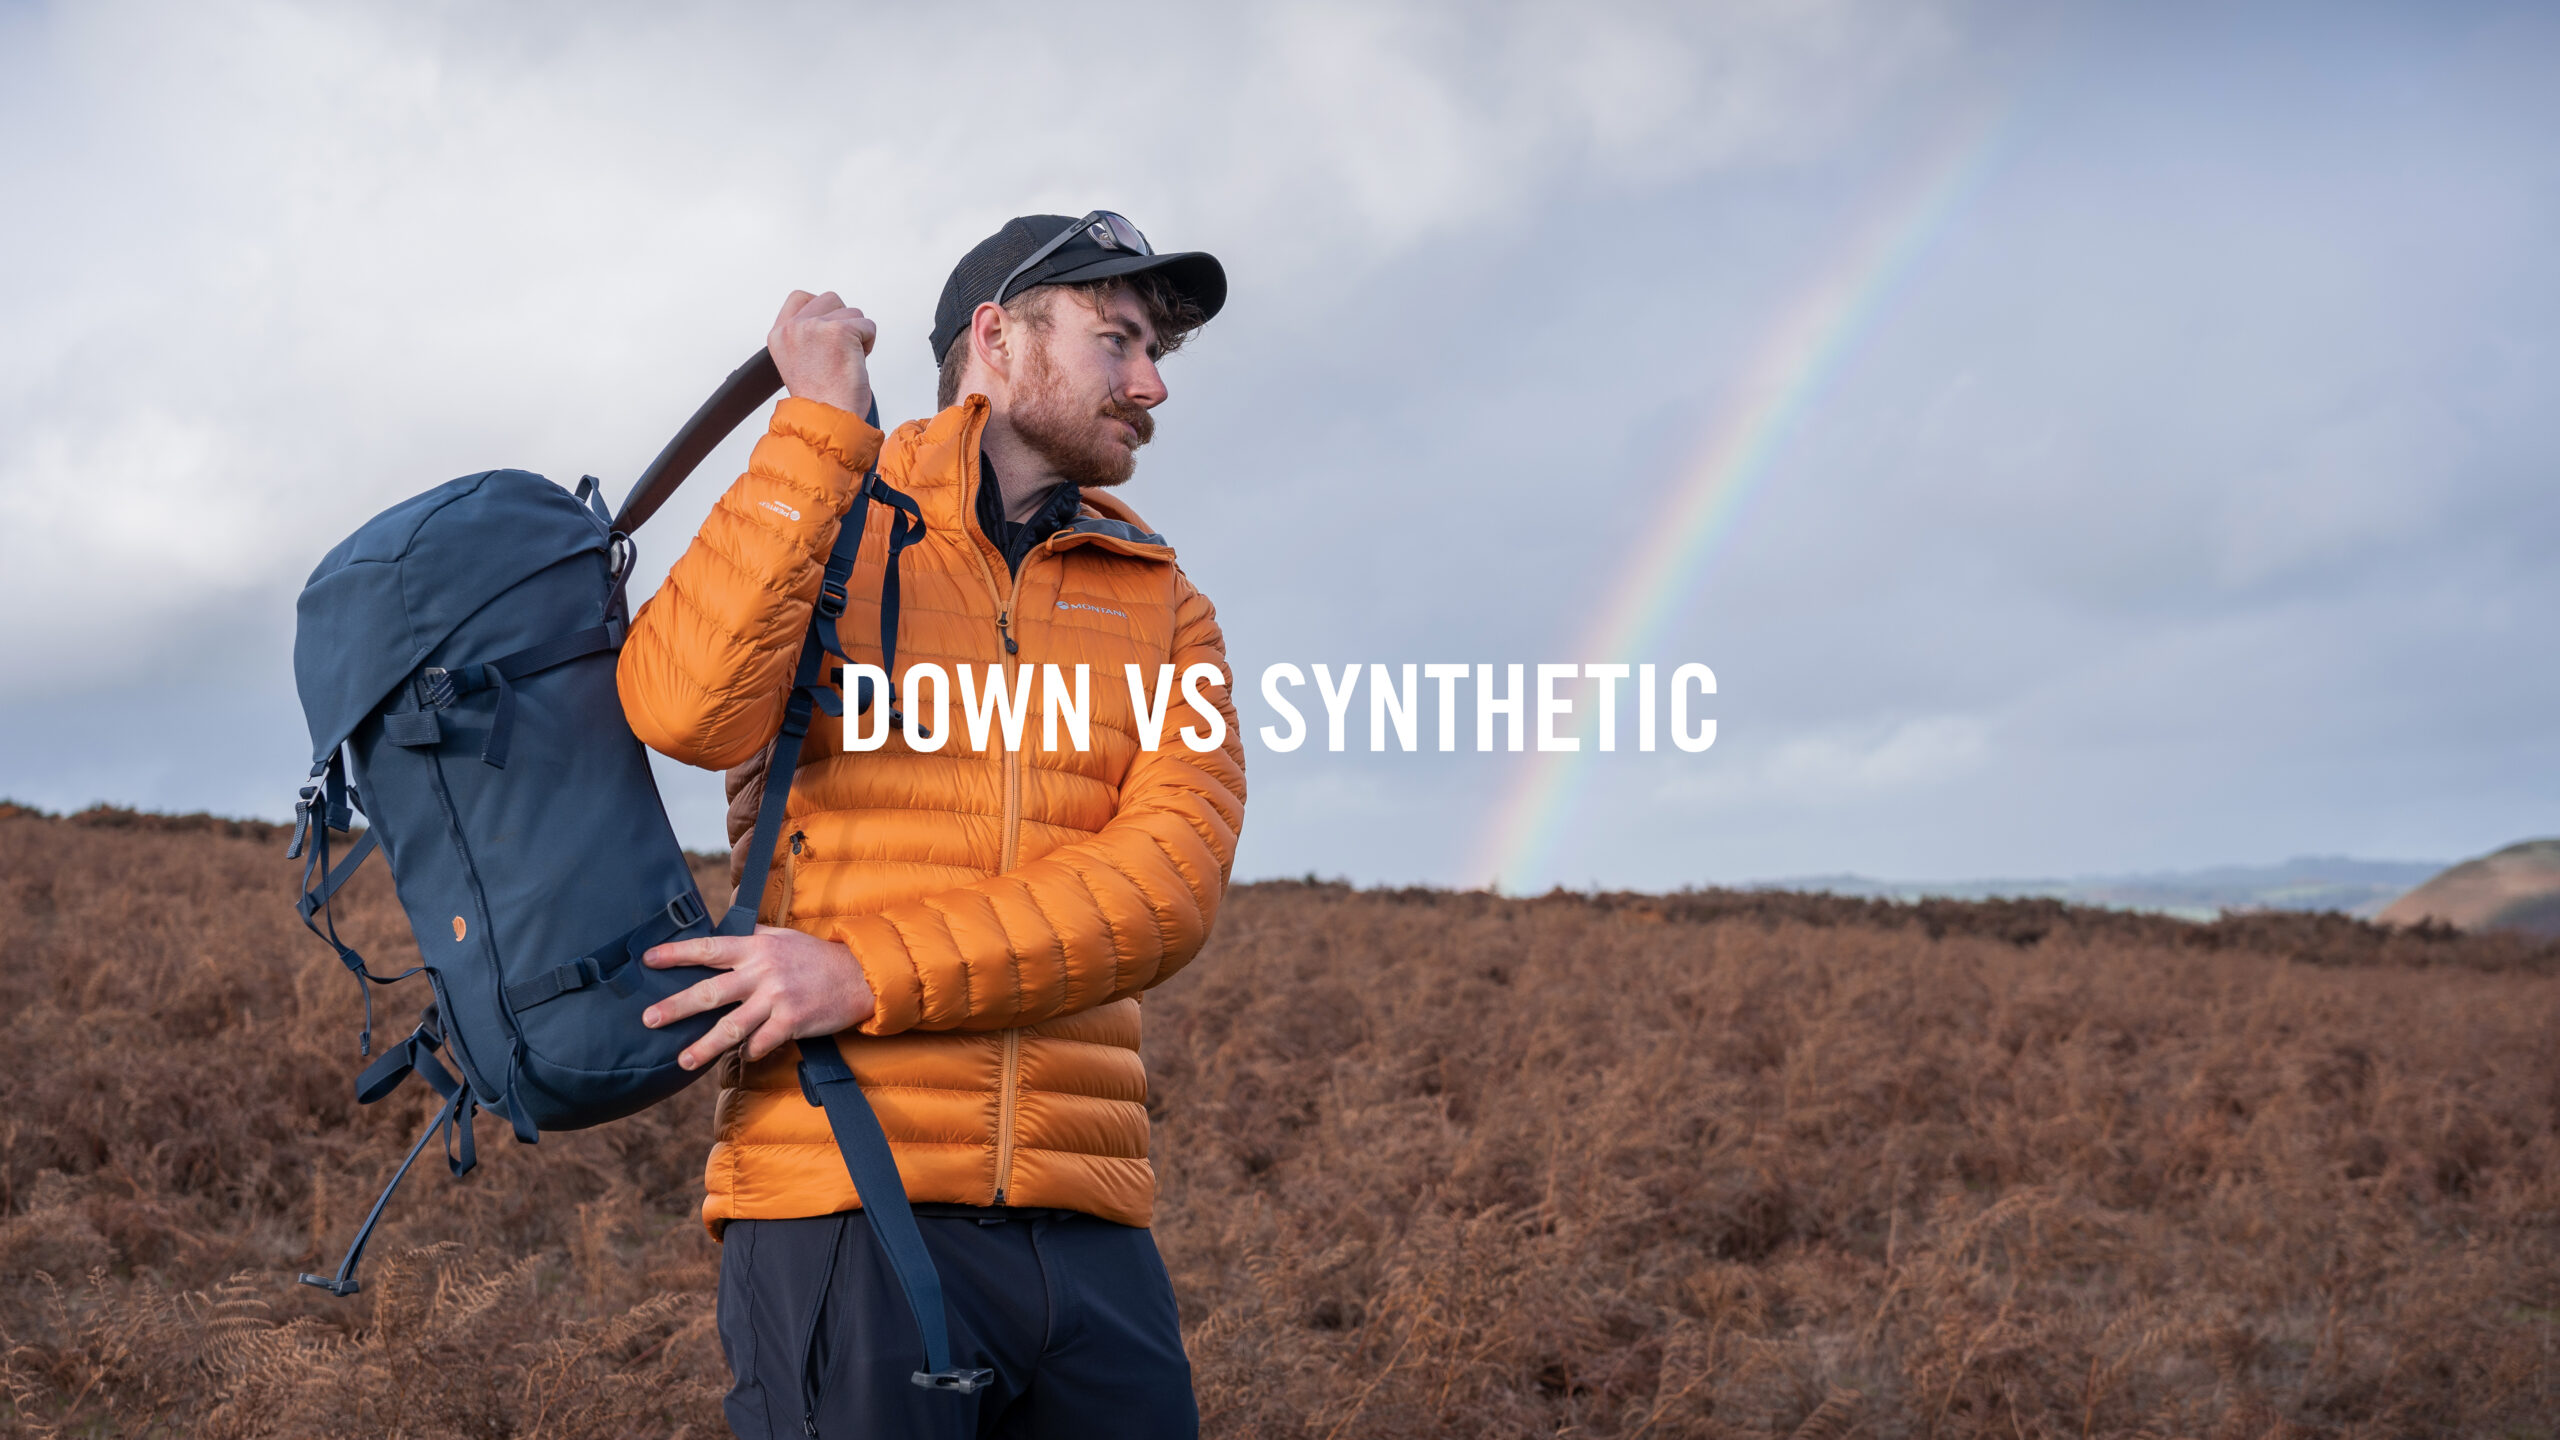 Down vs Synthetic: What’s the difference?